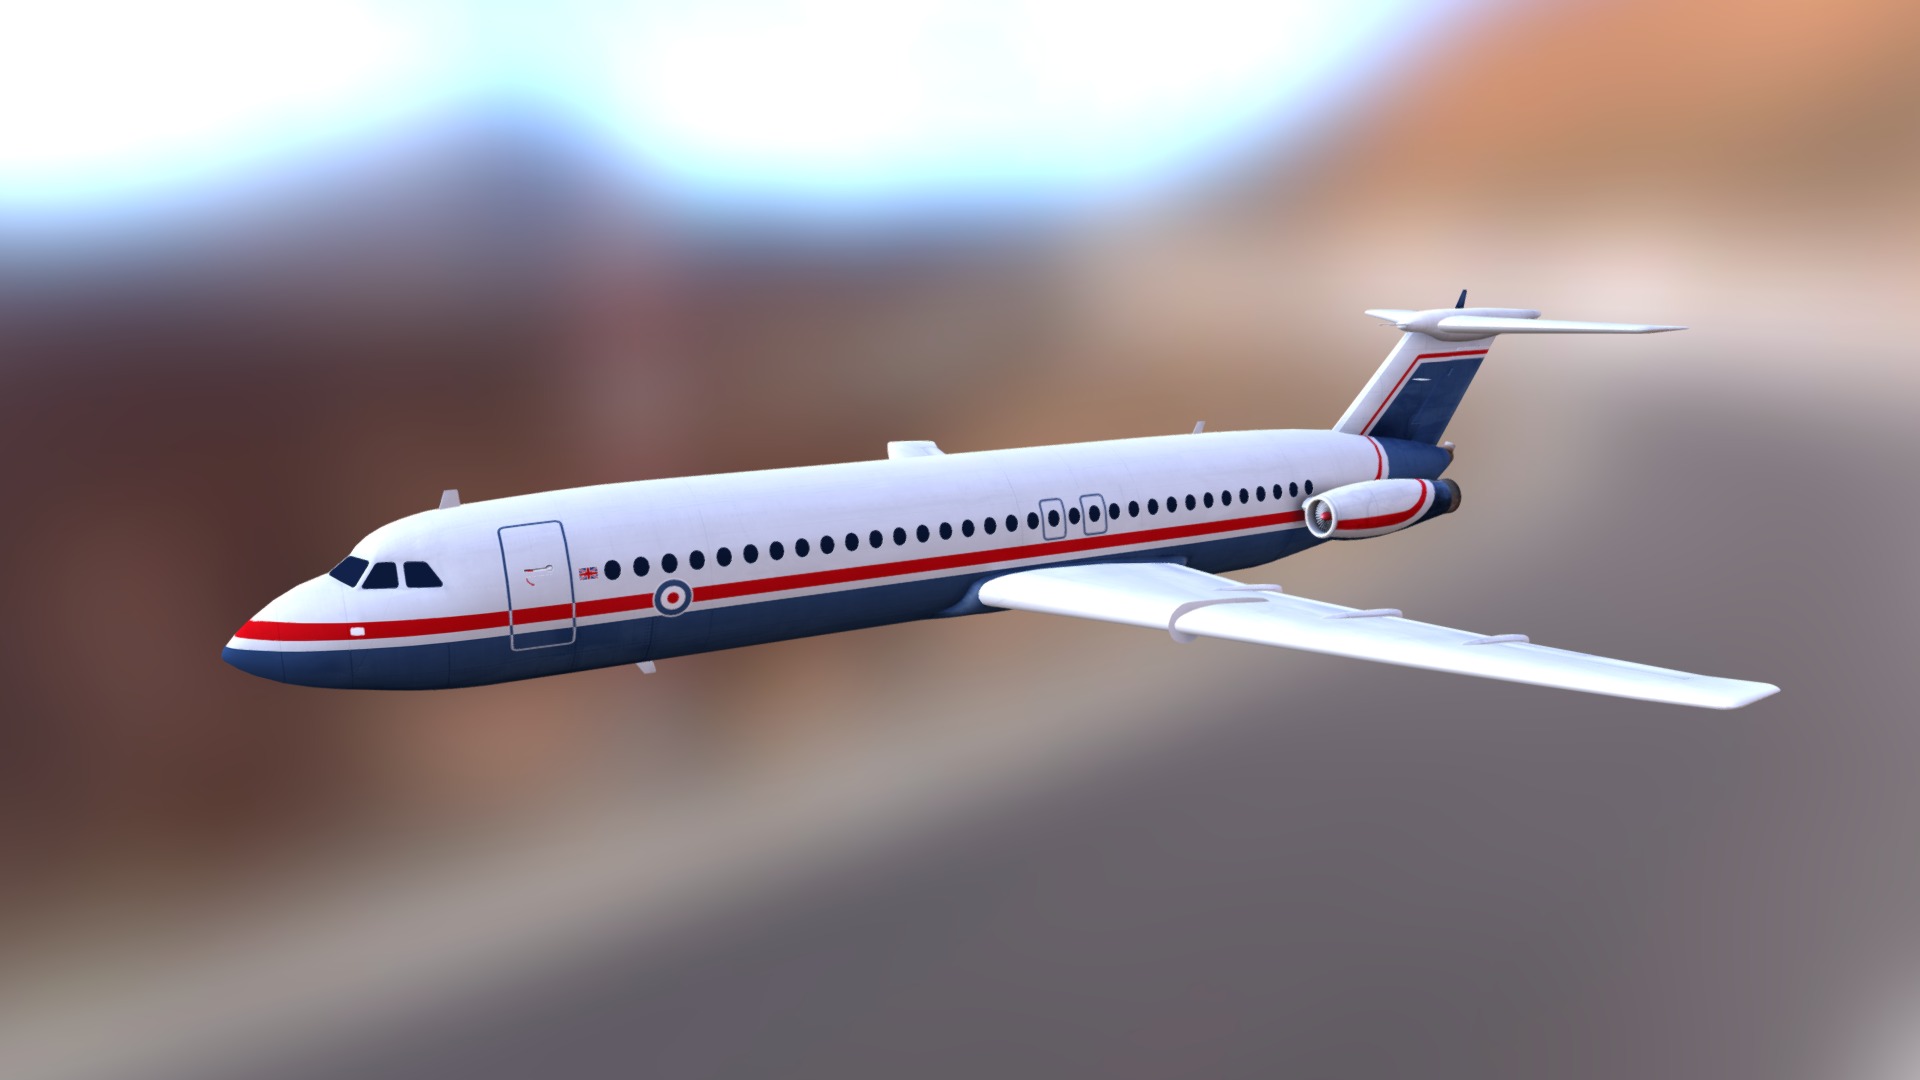 3D model British Aircraft Corp 500 - This is a 3D model of the British Aircraft Corp 500. The 3D model is about a plane flying in the sky.